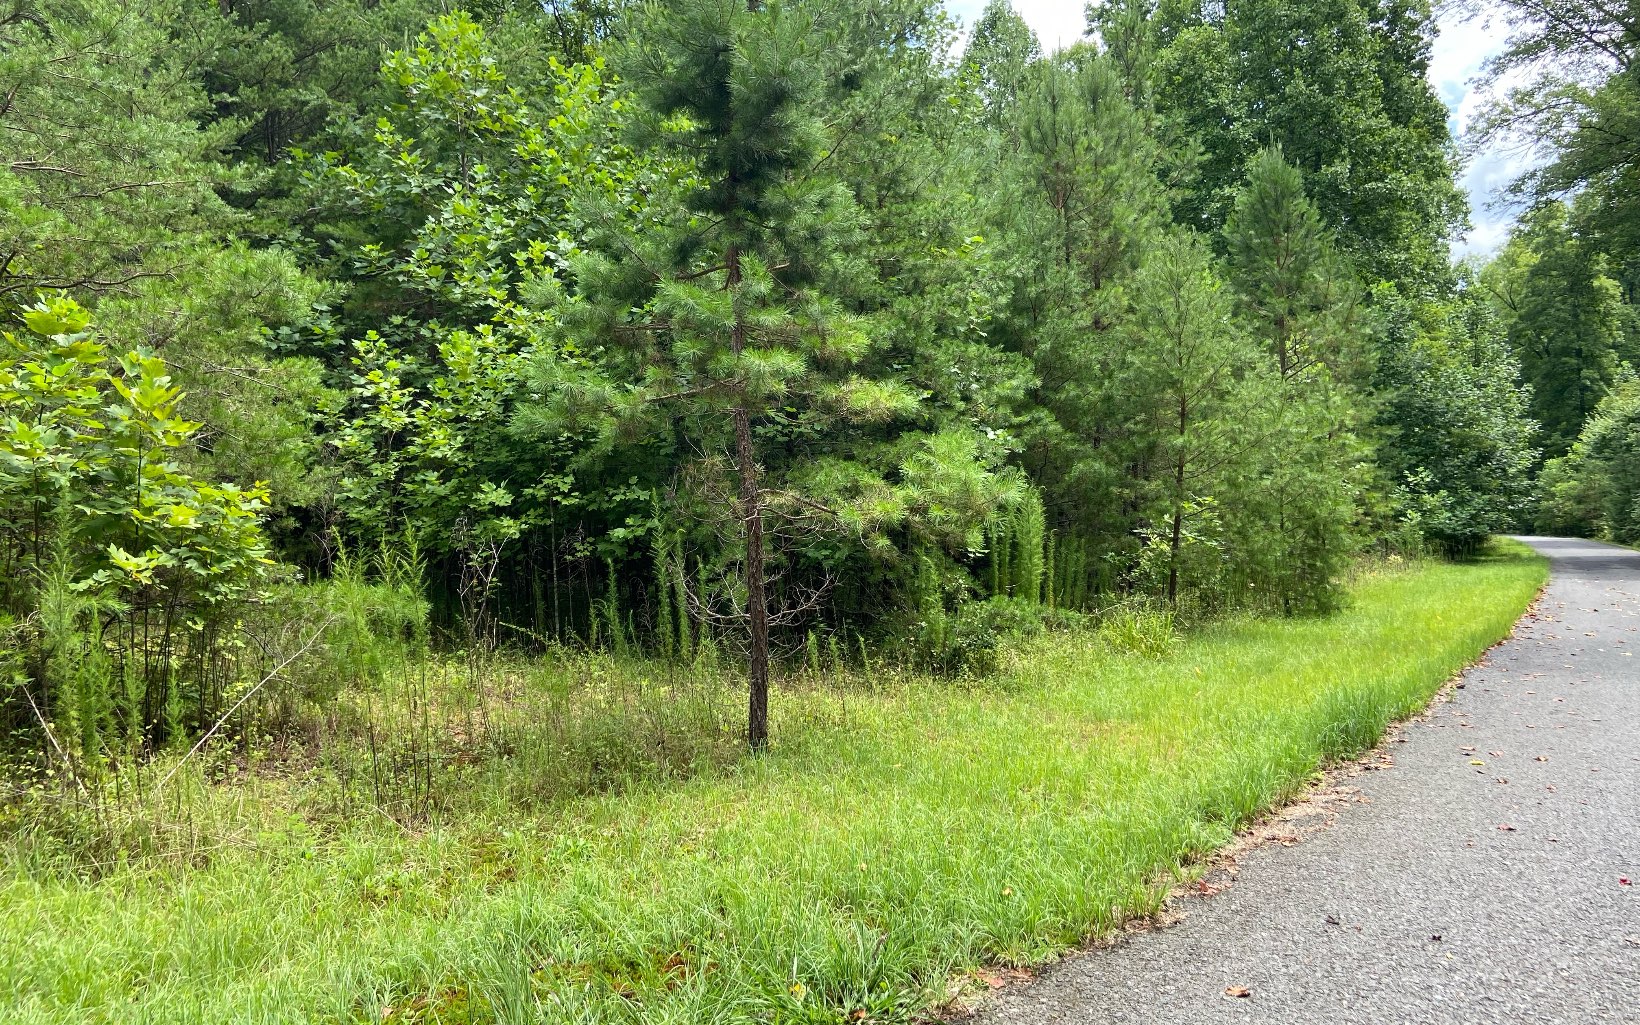 2.89 wooded acres in a beautiful community, with very nice homes. This lot is level and gentle, ready for clearing for your mountain home.